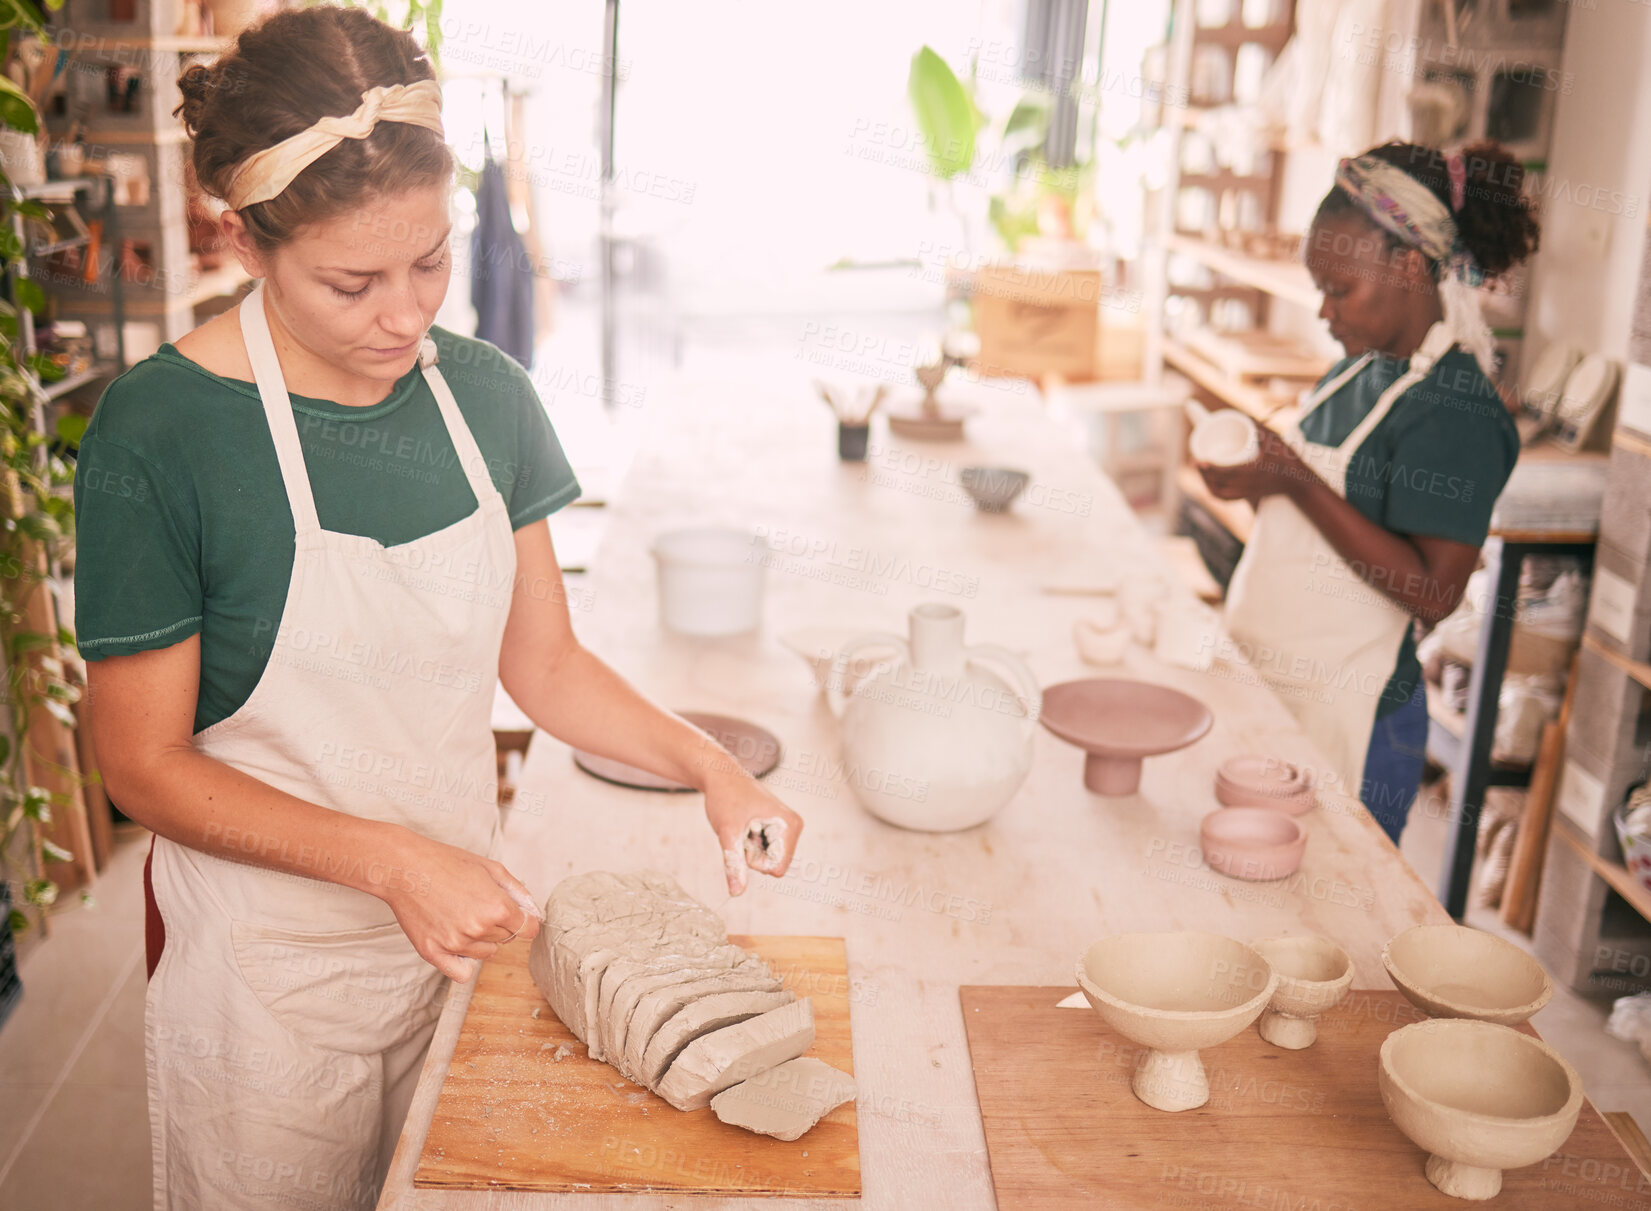 Buy stock photo Pottery workshop and woman dividing clay for sculpting process and productivity at creative business. Focus, concentration and skill of interracial artist team working in professional workspace.